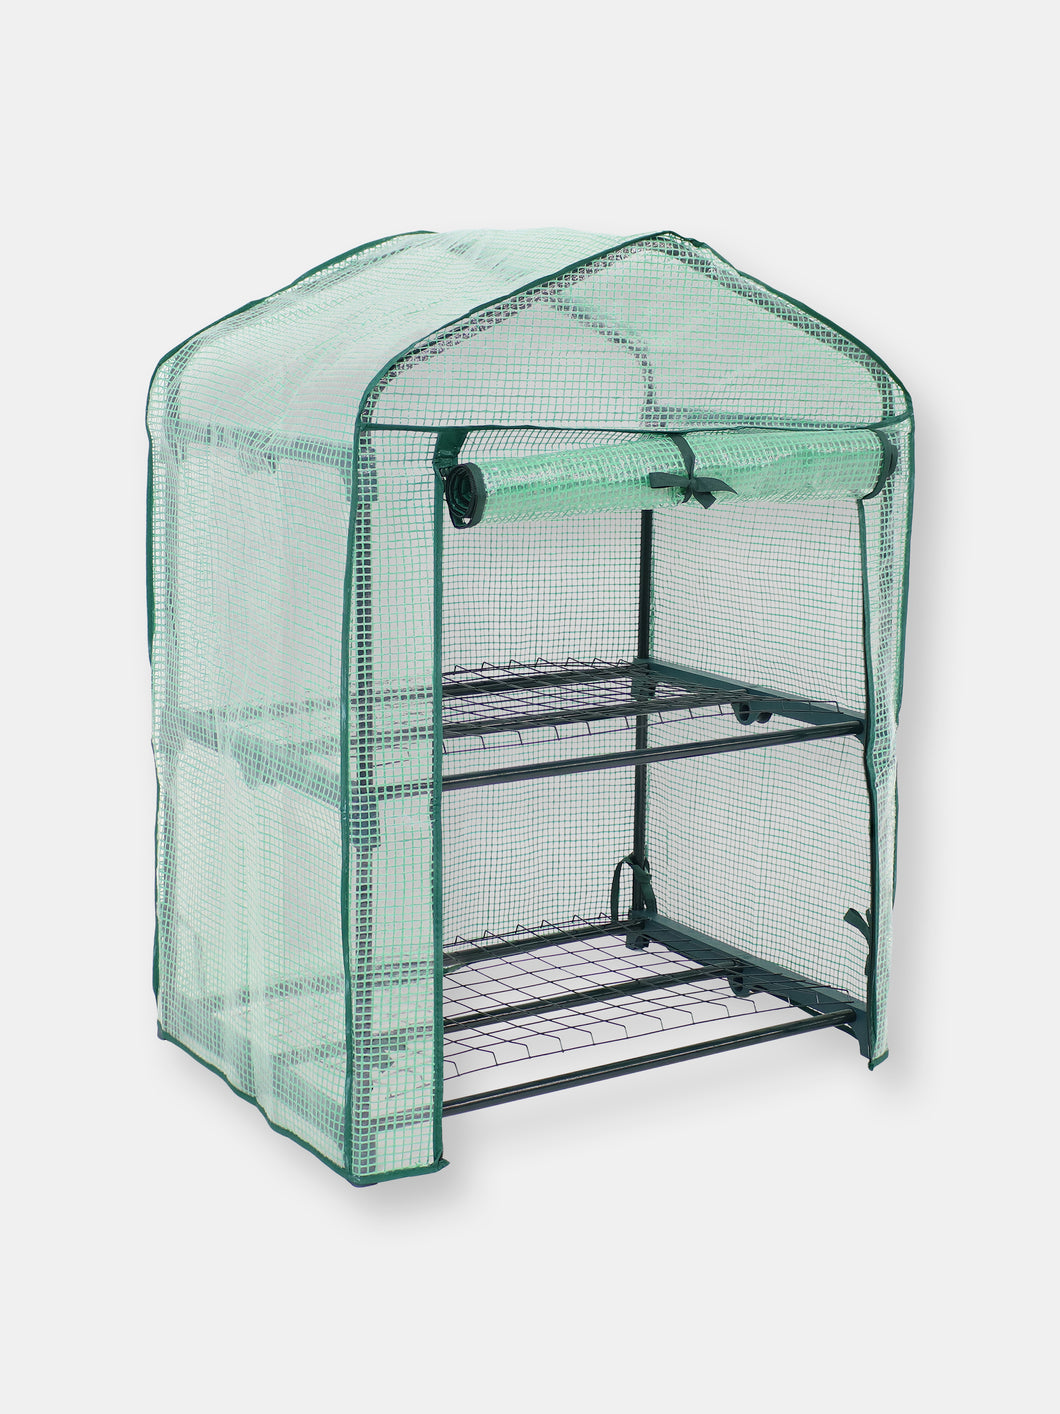 Portable 2-Tier Mini Greenhouse for Outdoors with Cover